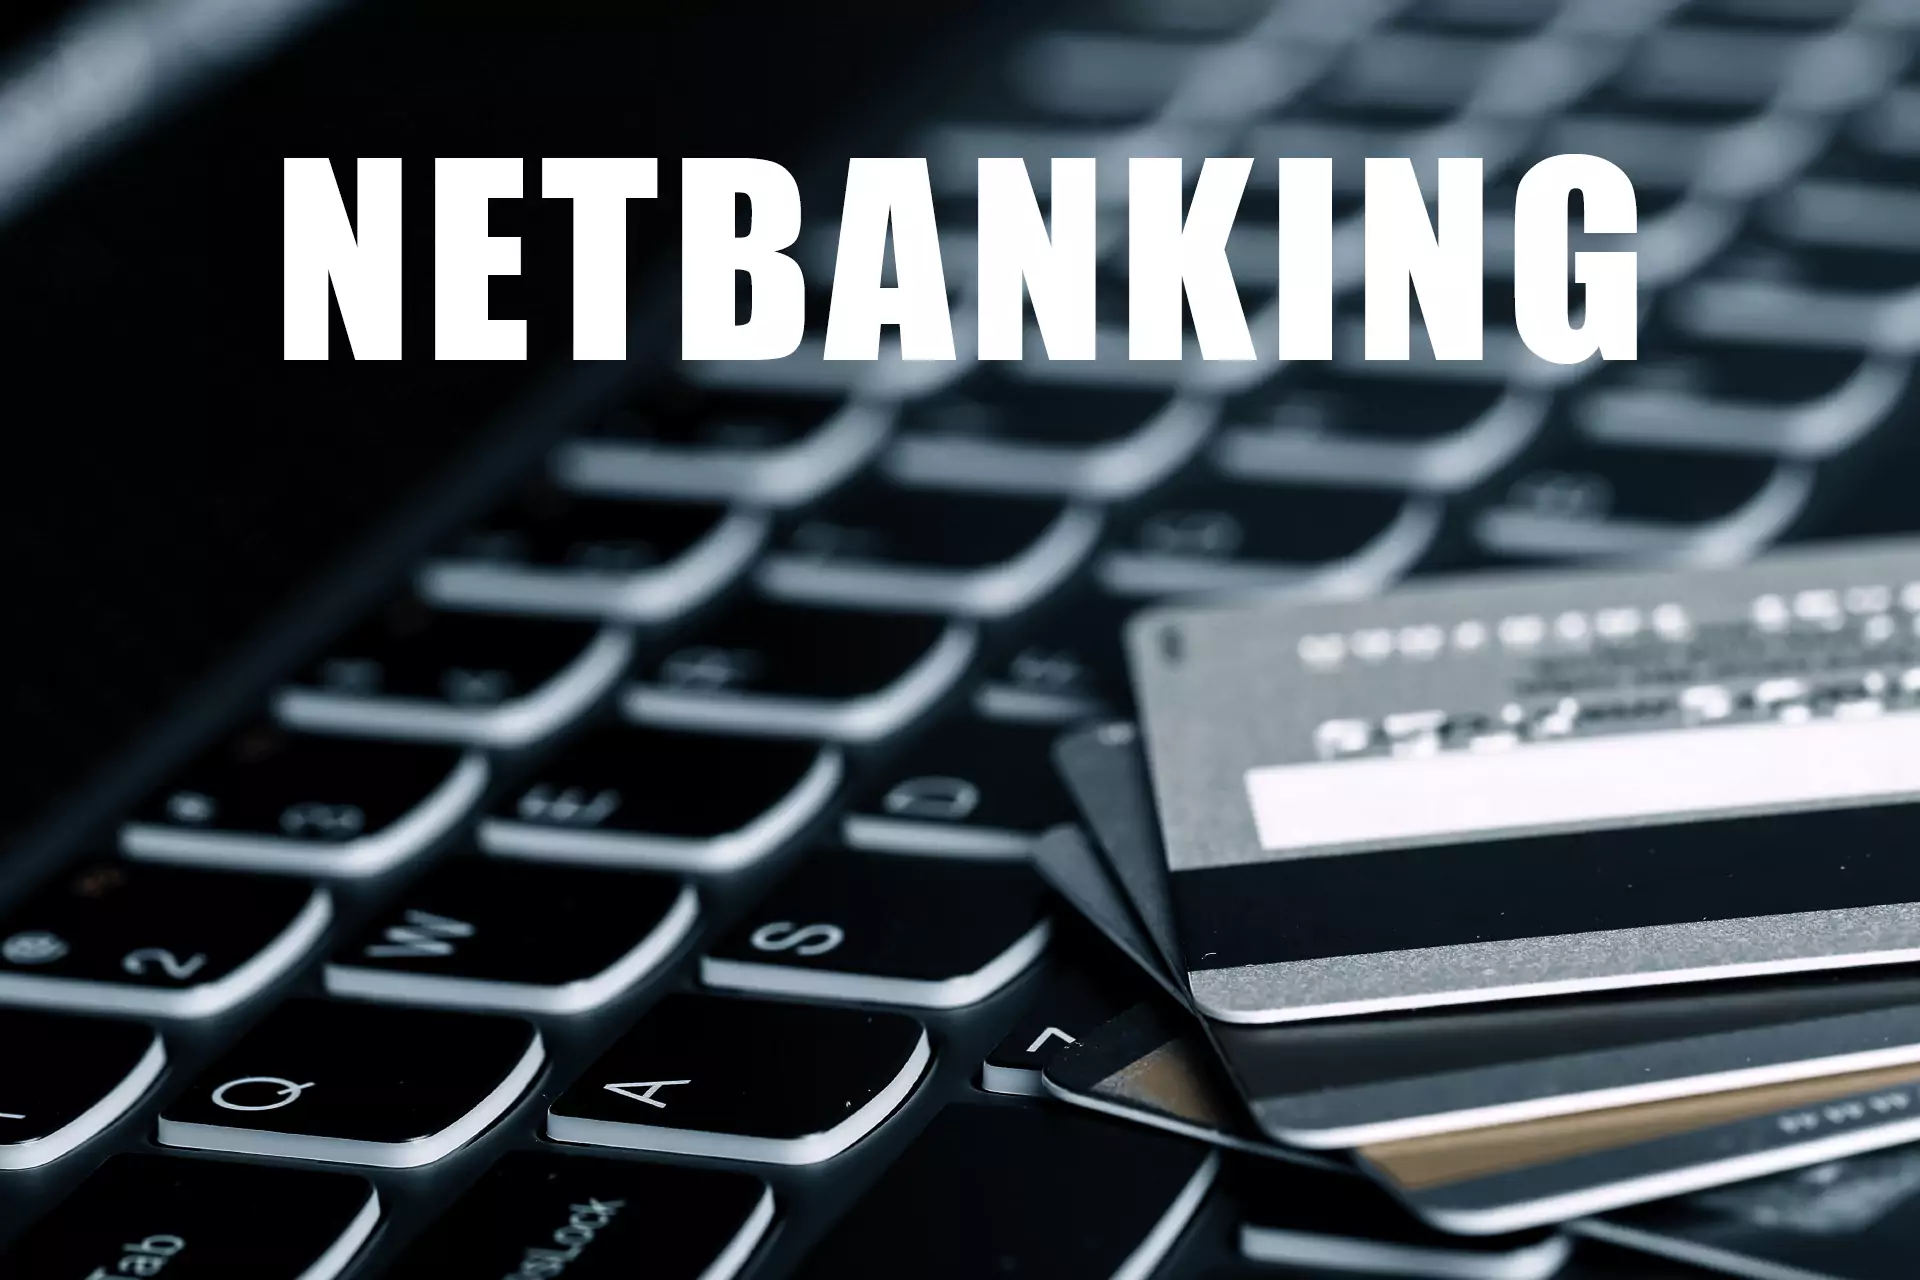 You can make a deposit to your betting account with a bank card.